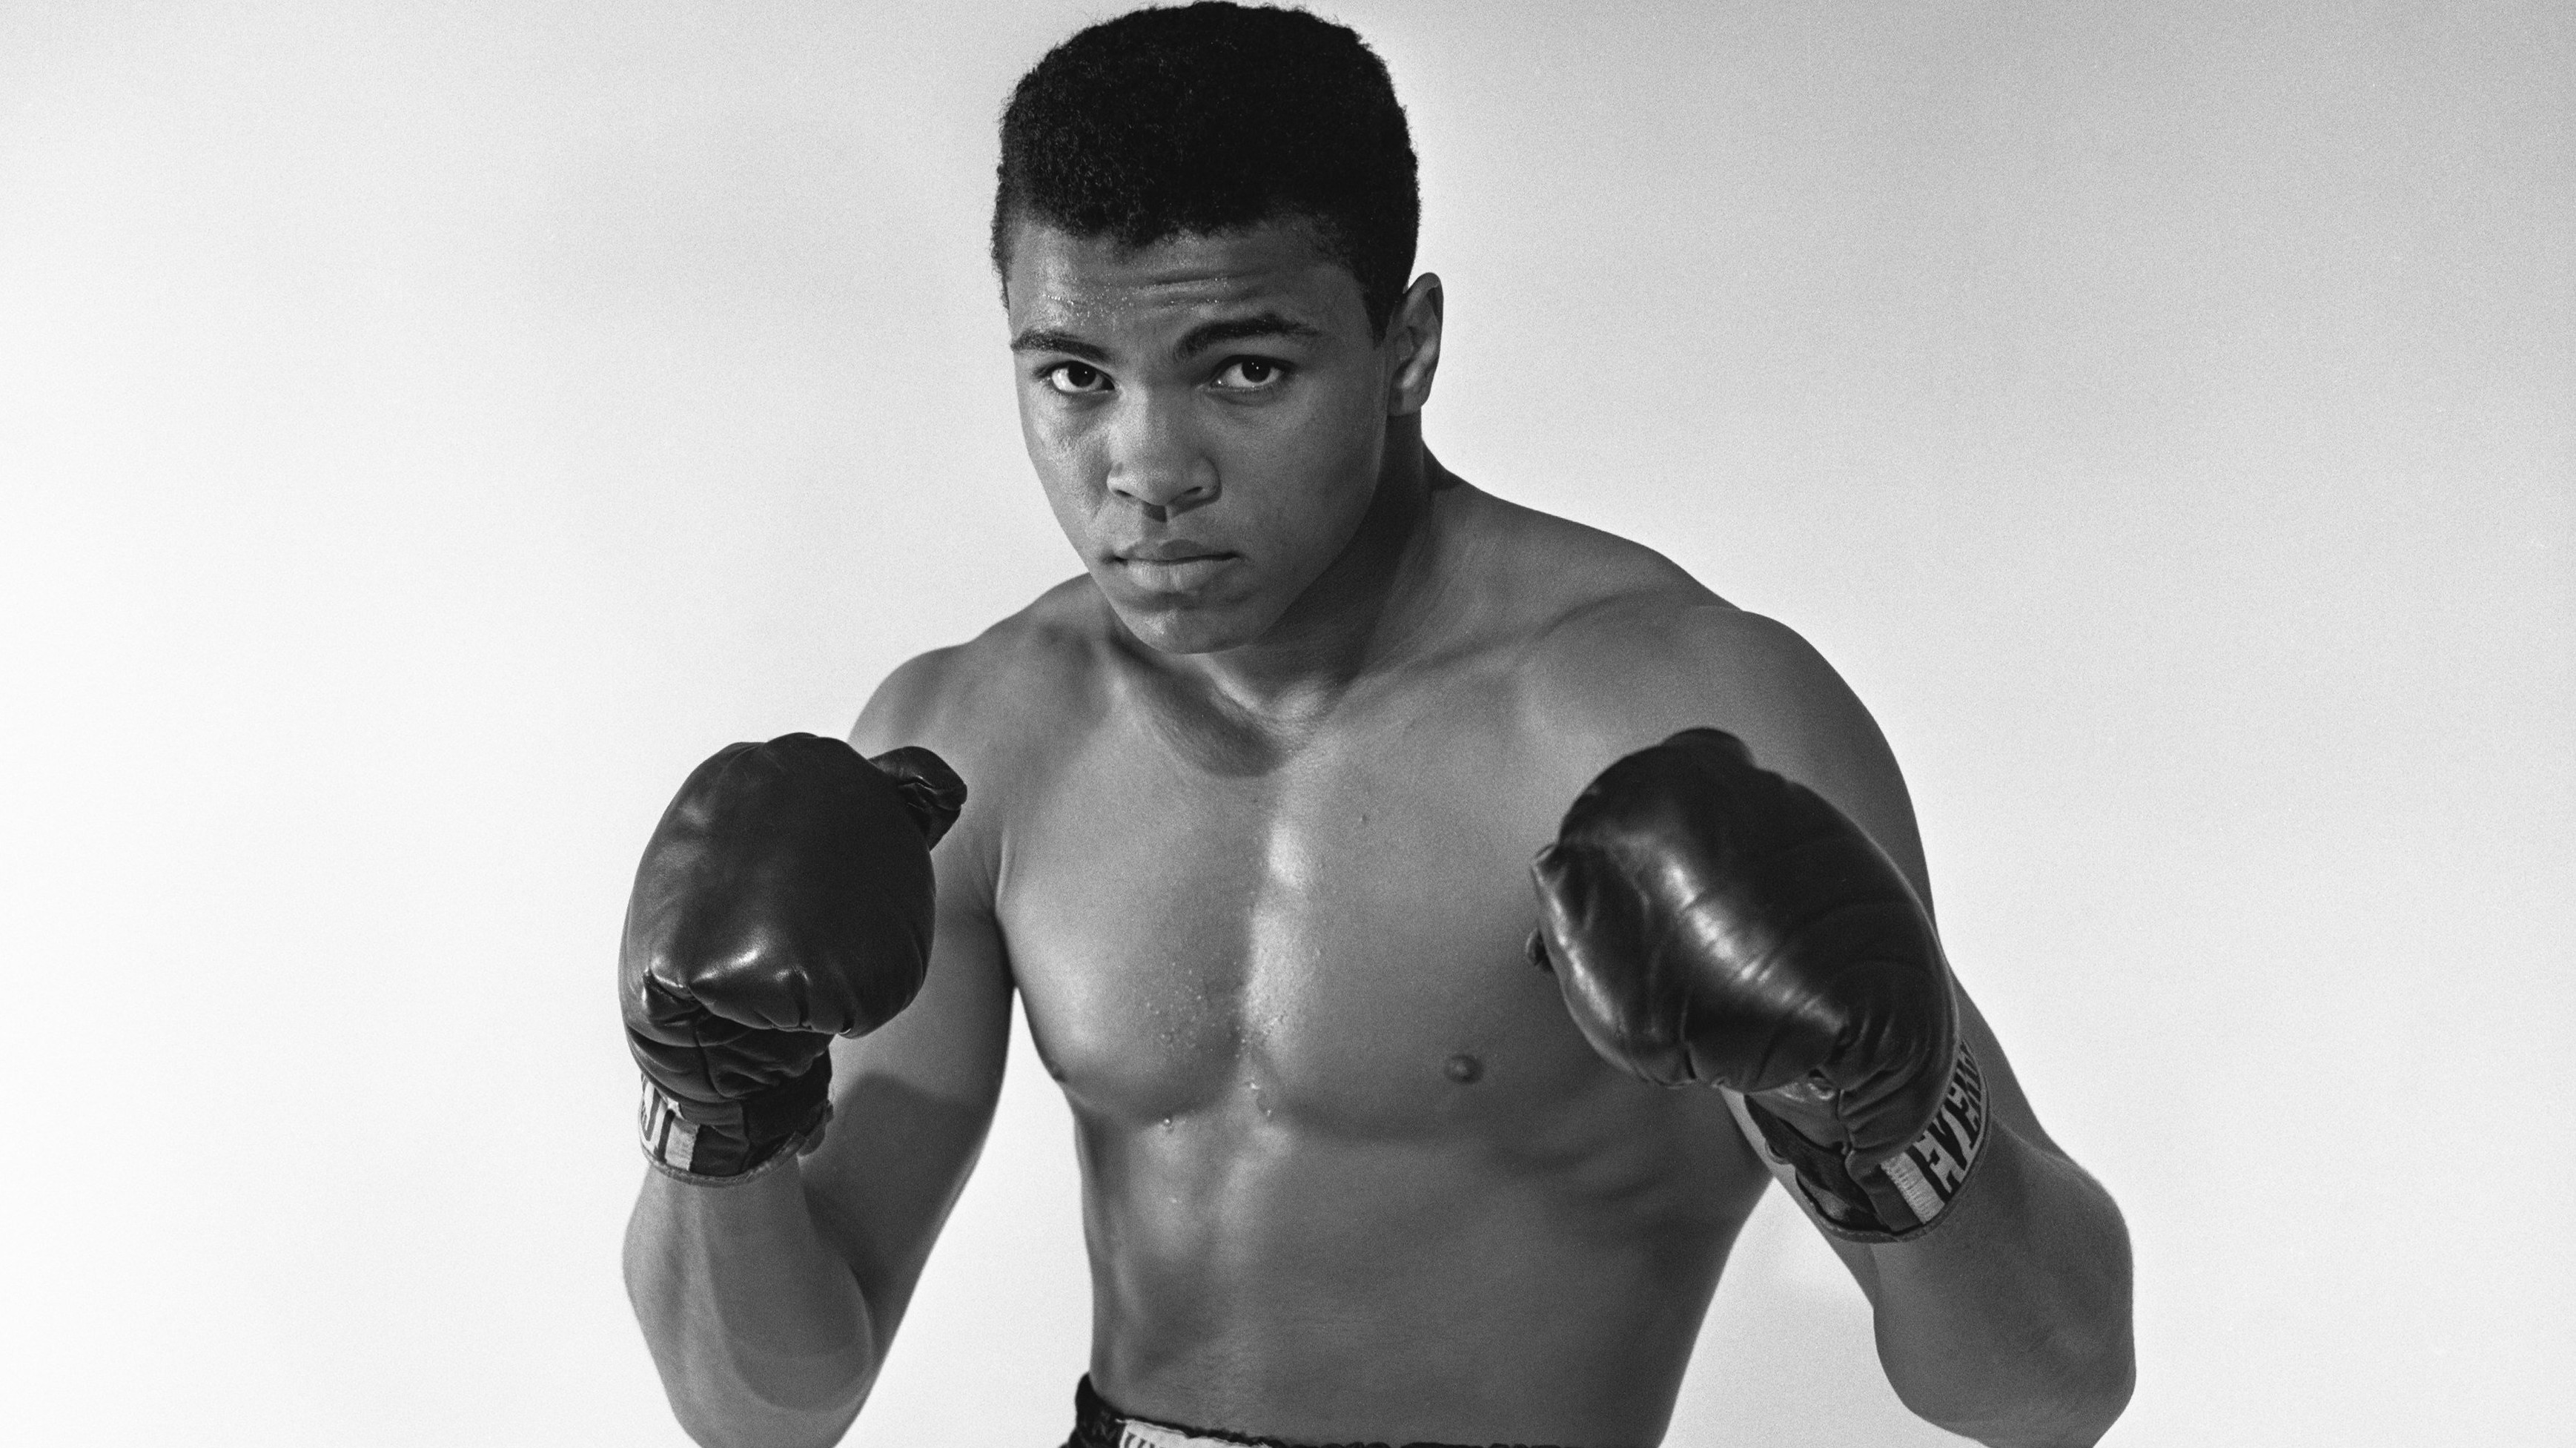 Muhammad Ali - Muhammad Ali Wallpapers Images Photos Pictures